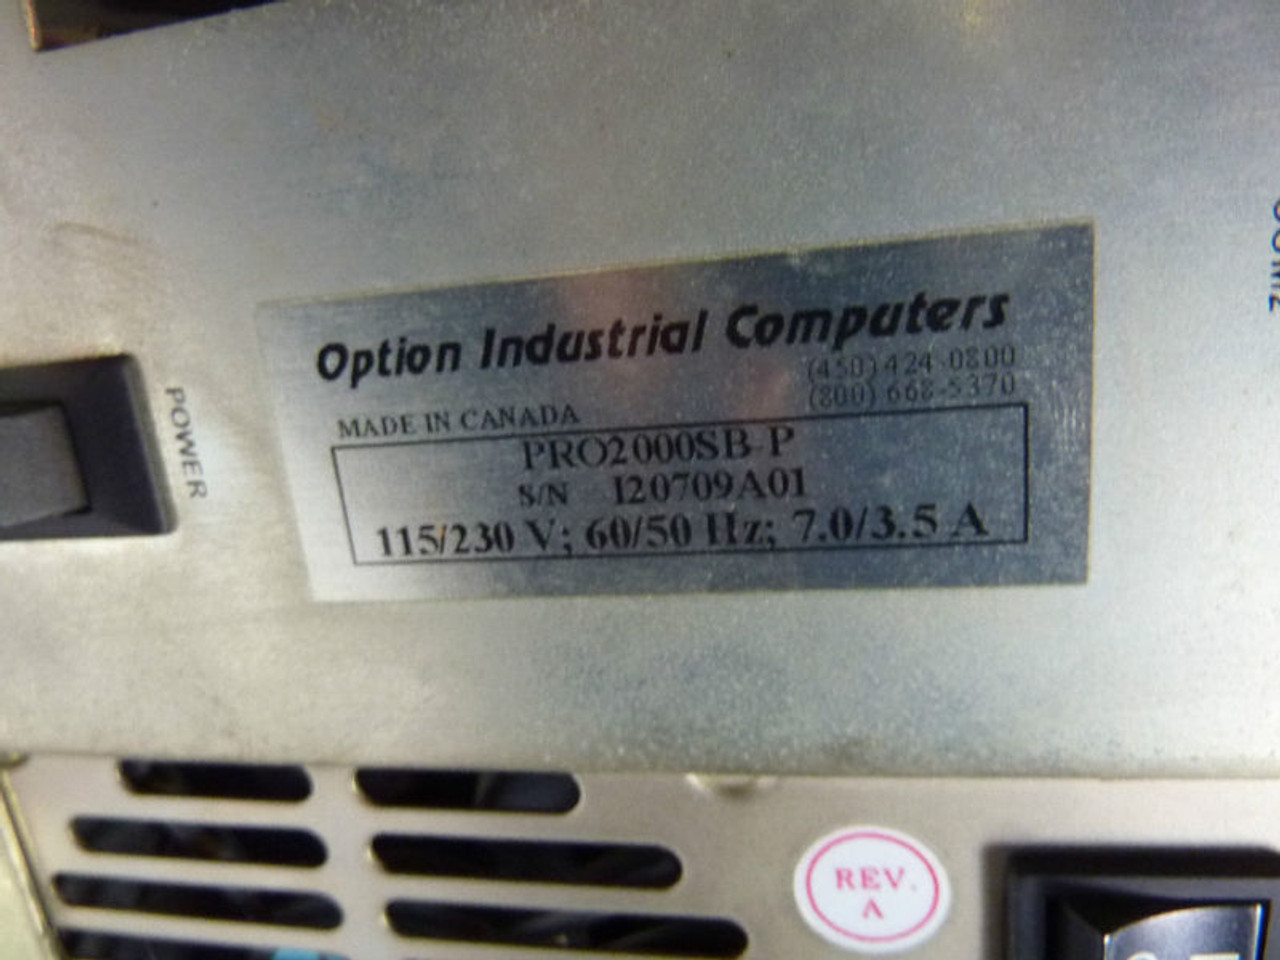 Option Industrial PRO2000SB-P Industrial Computer USED